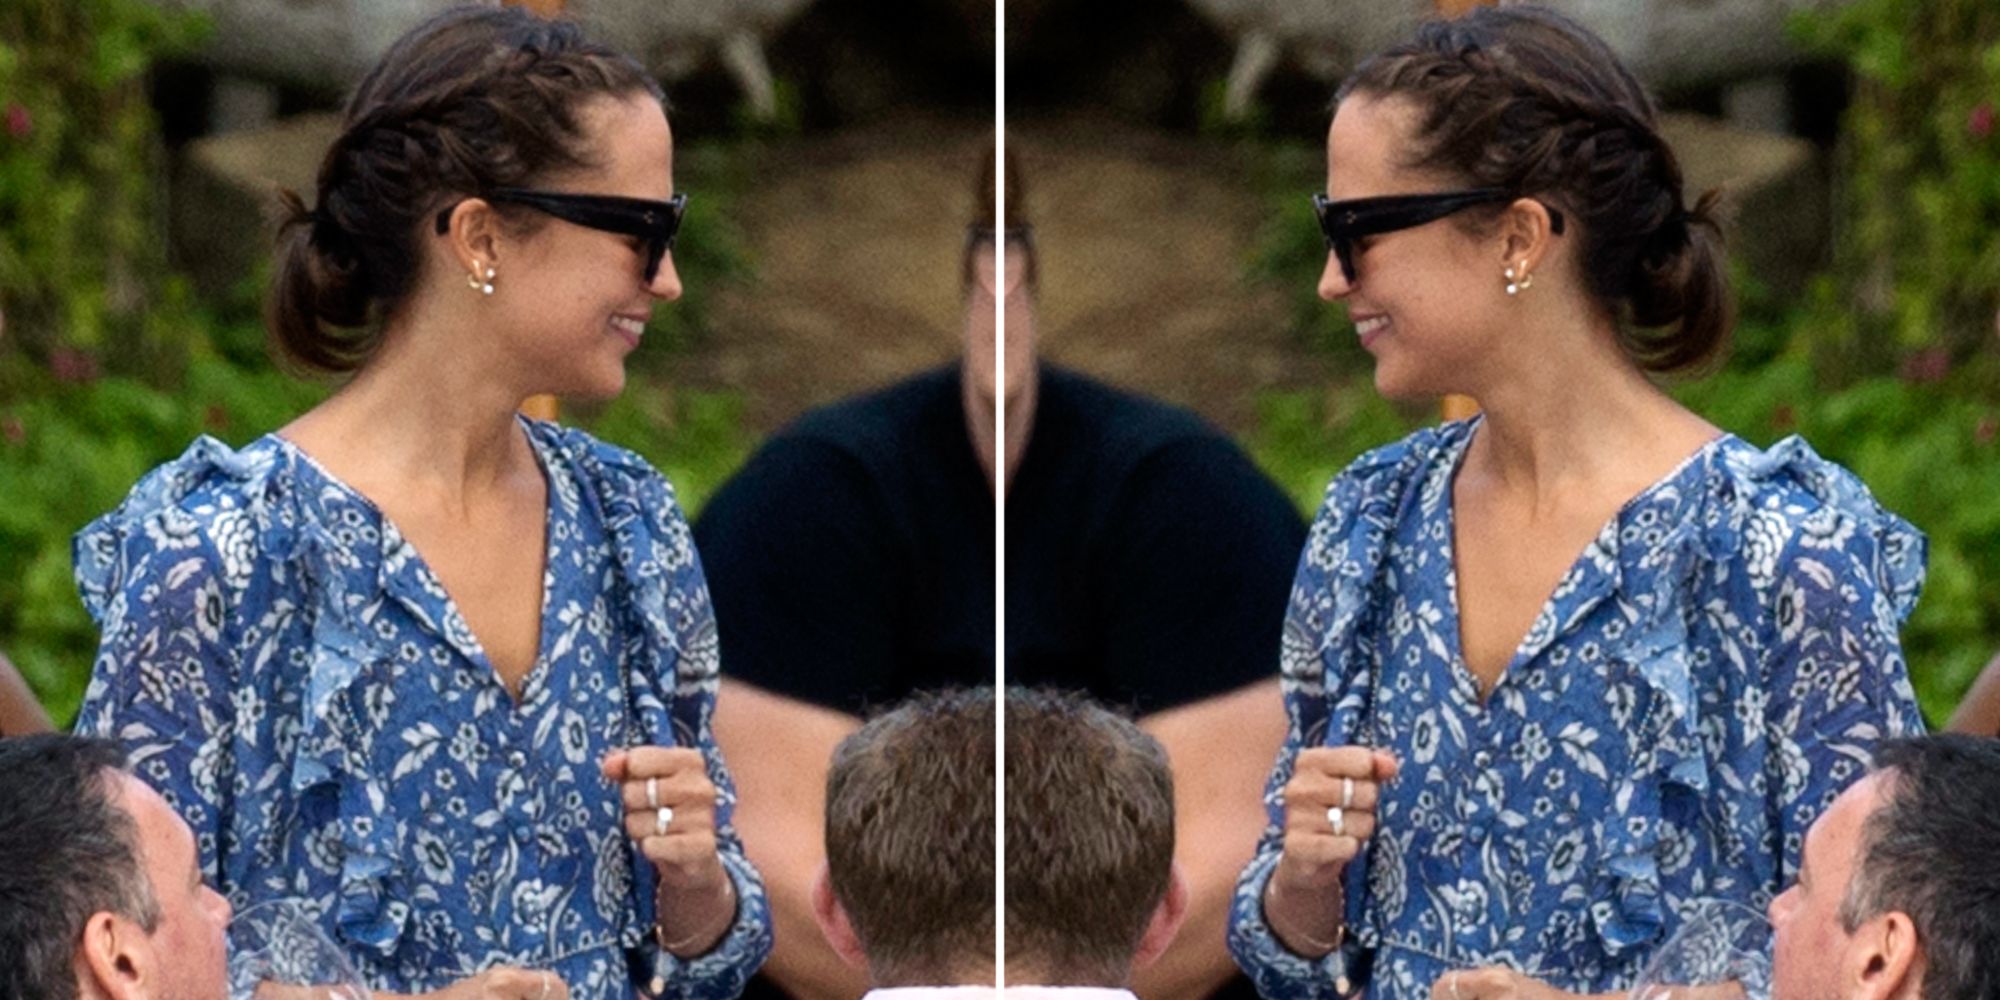 Michael Fassbender And Alicia Vikander Reportedly Married In Ibiza This  Weekend - Grazia